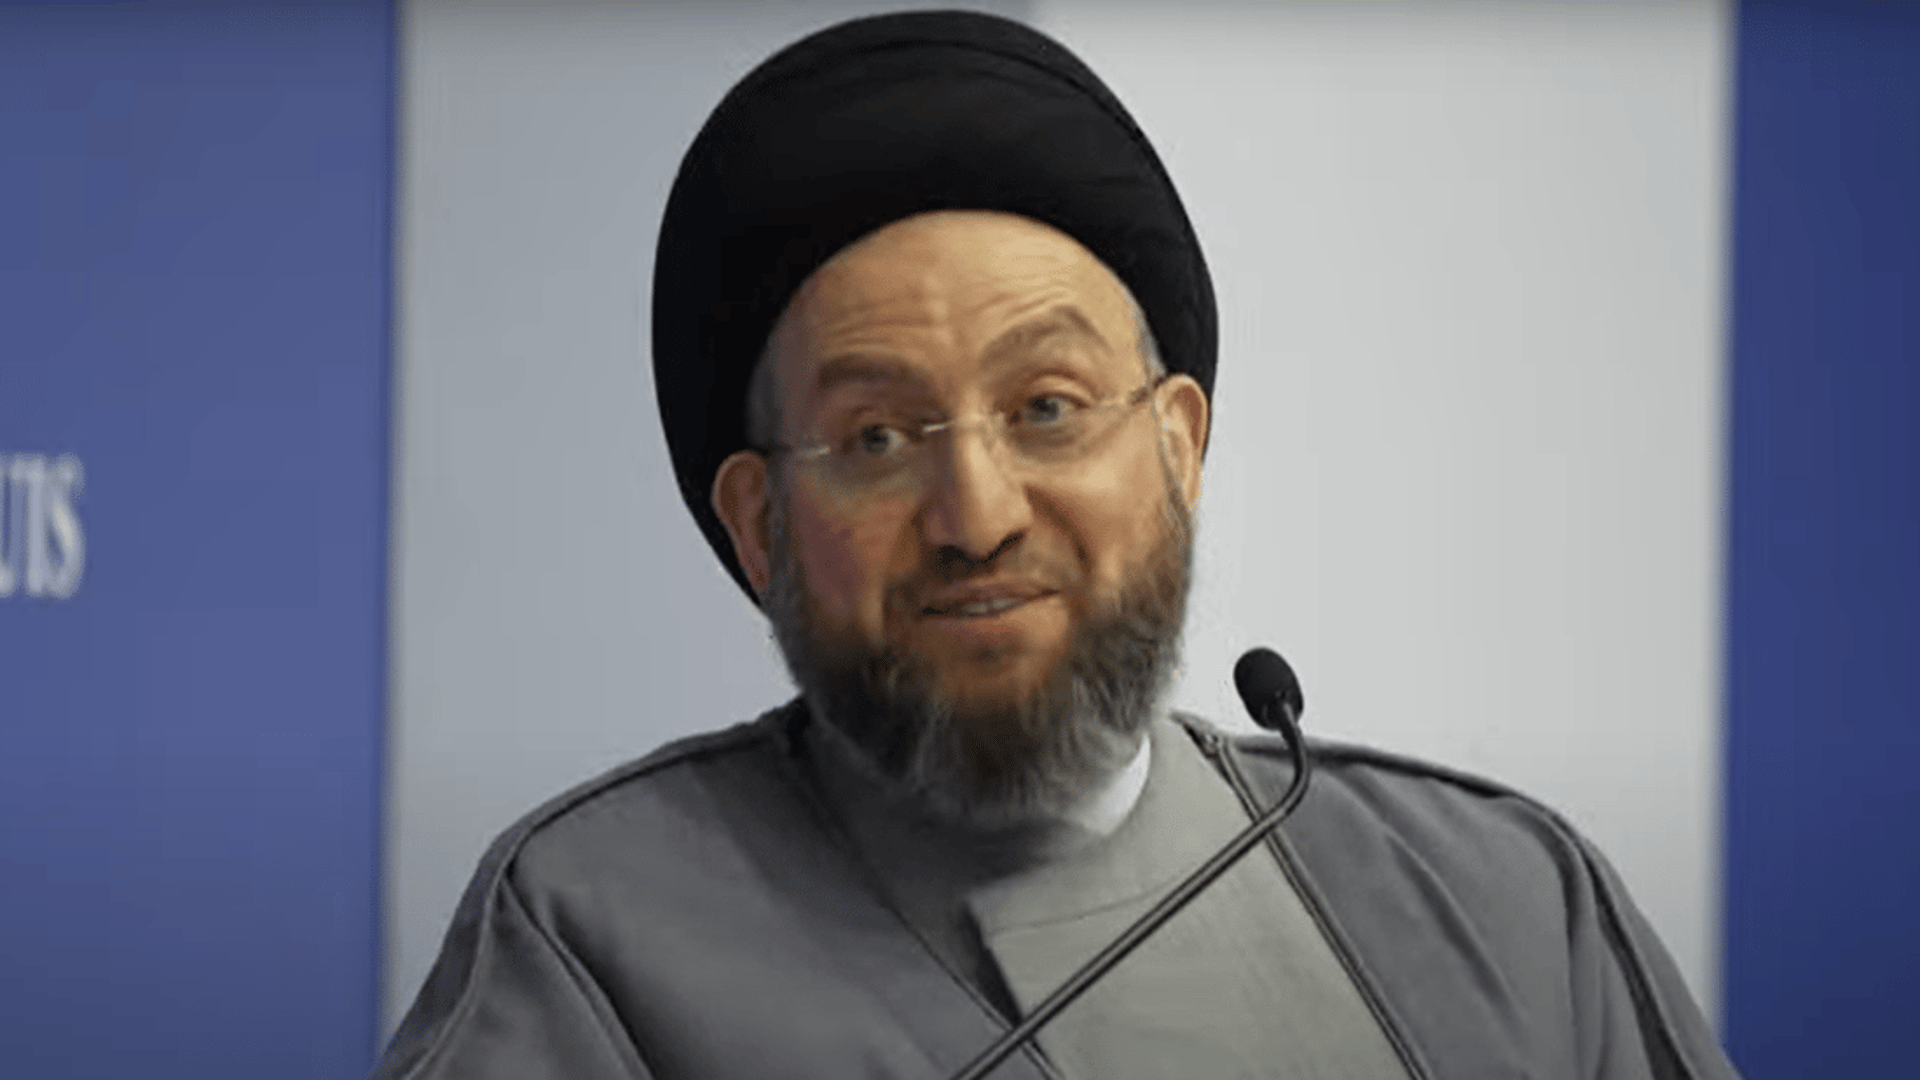 AlHakim says Irans attack on Israel was to establish the right to respond